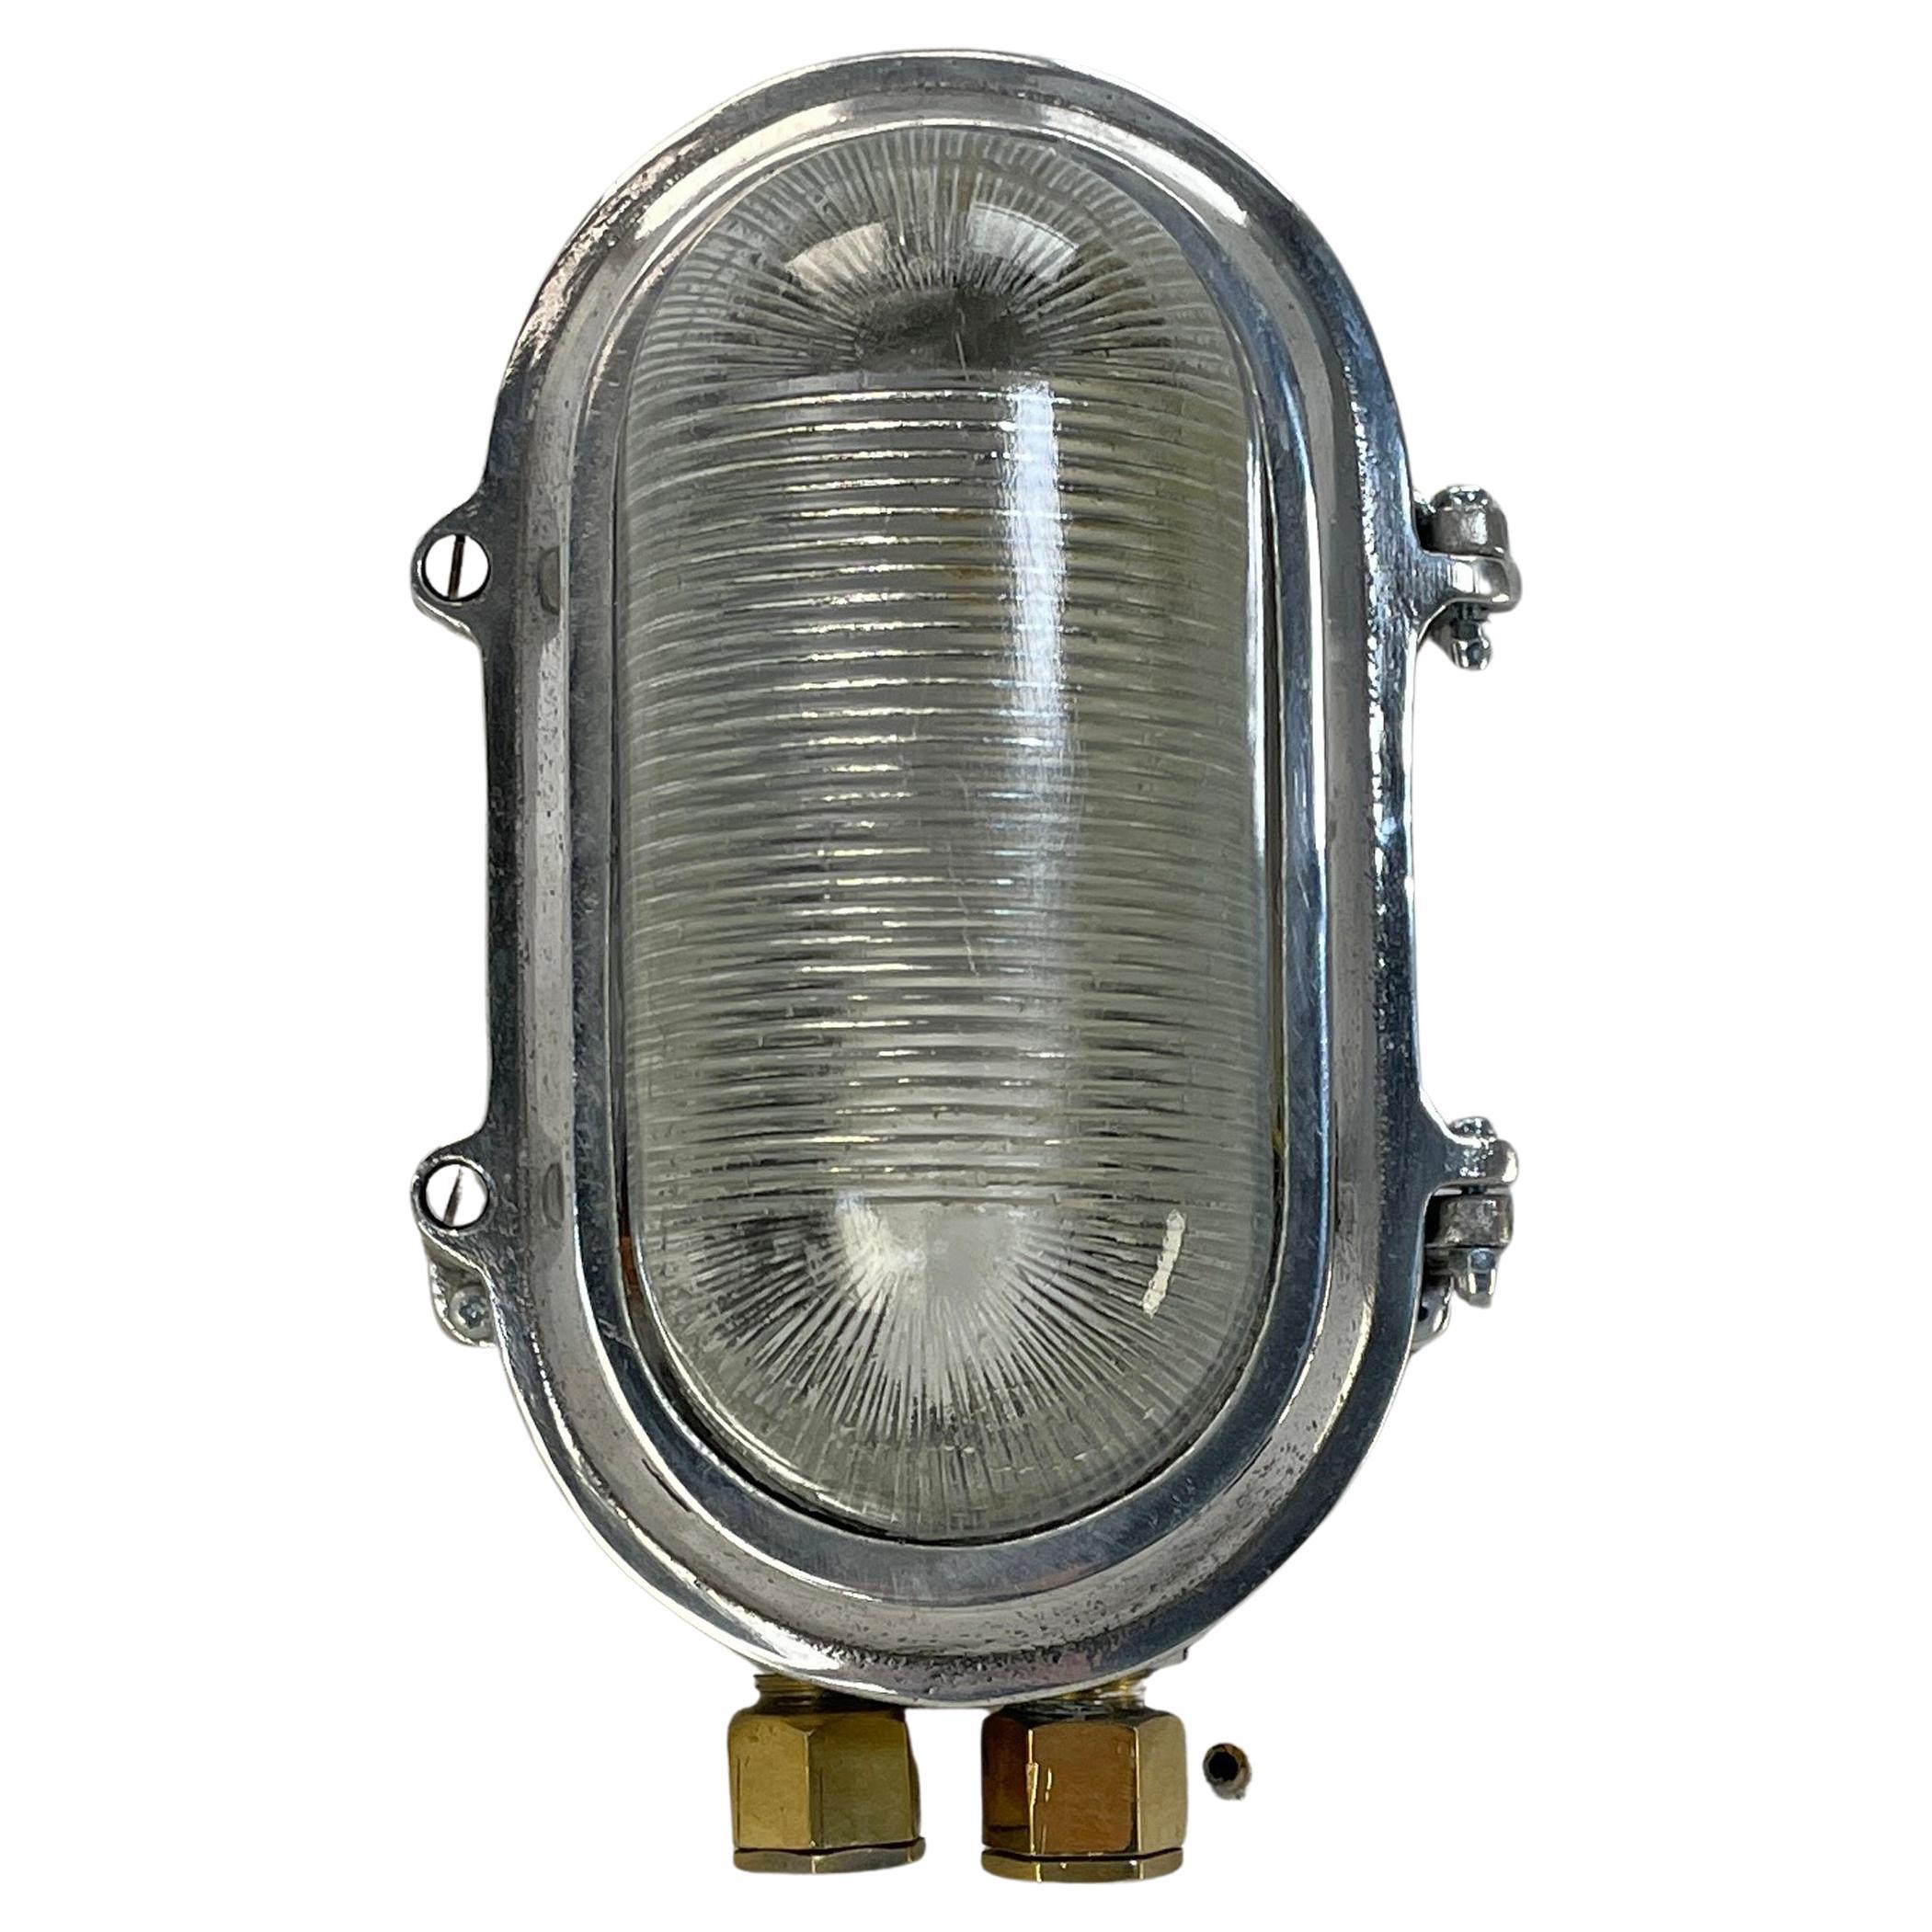 A vintage Industrial cast aluminium oval bulkhead wall light with prismatic reeded glass.

Originally marine lighting, this type of aluminium circular bulkhead is found on ship passageways. Professionally restored and rewired by Loomlight in UK